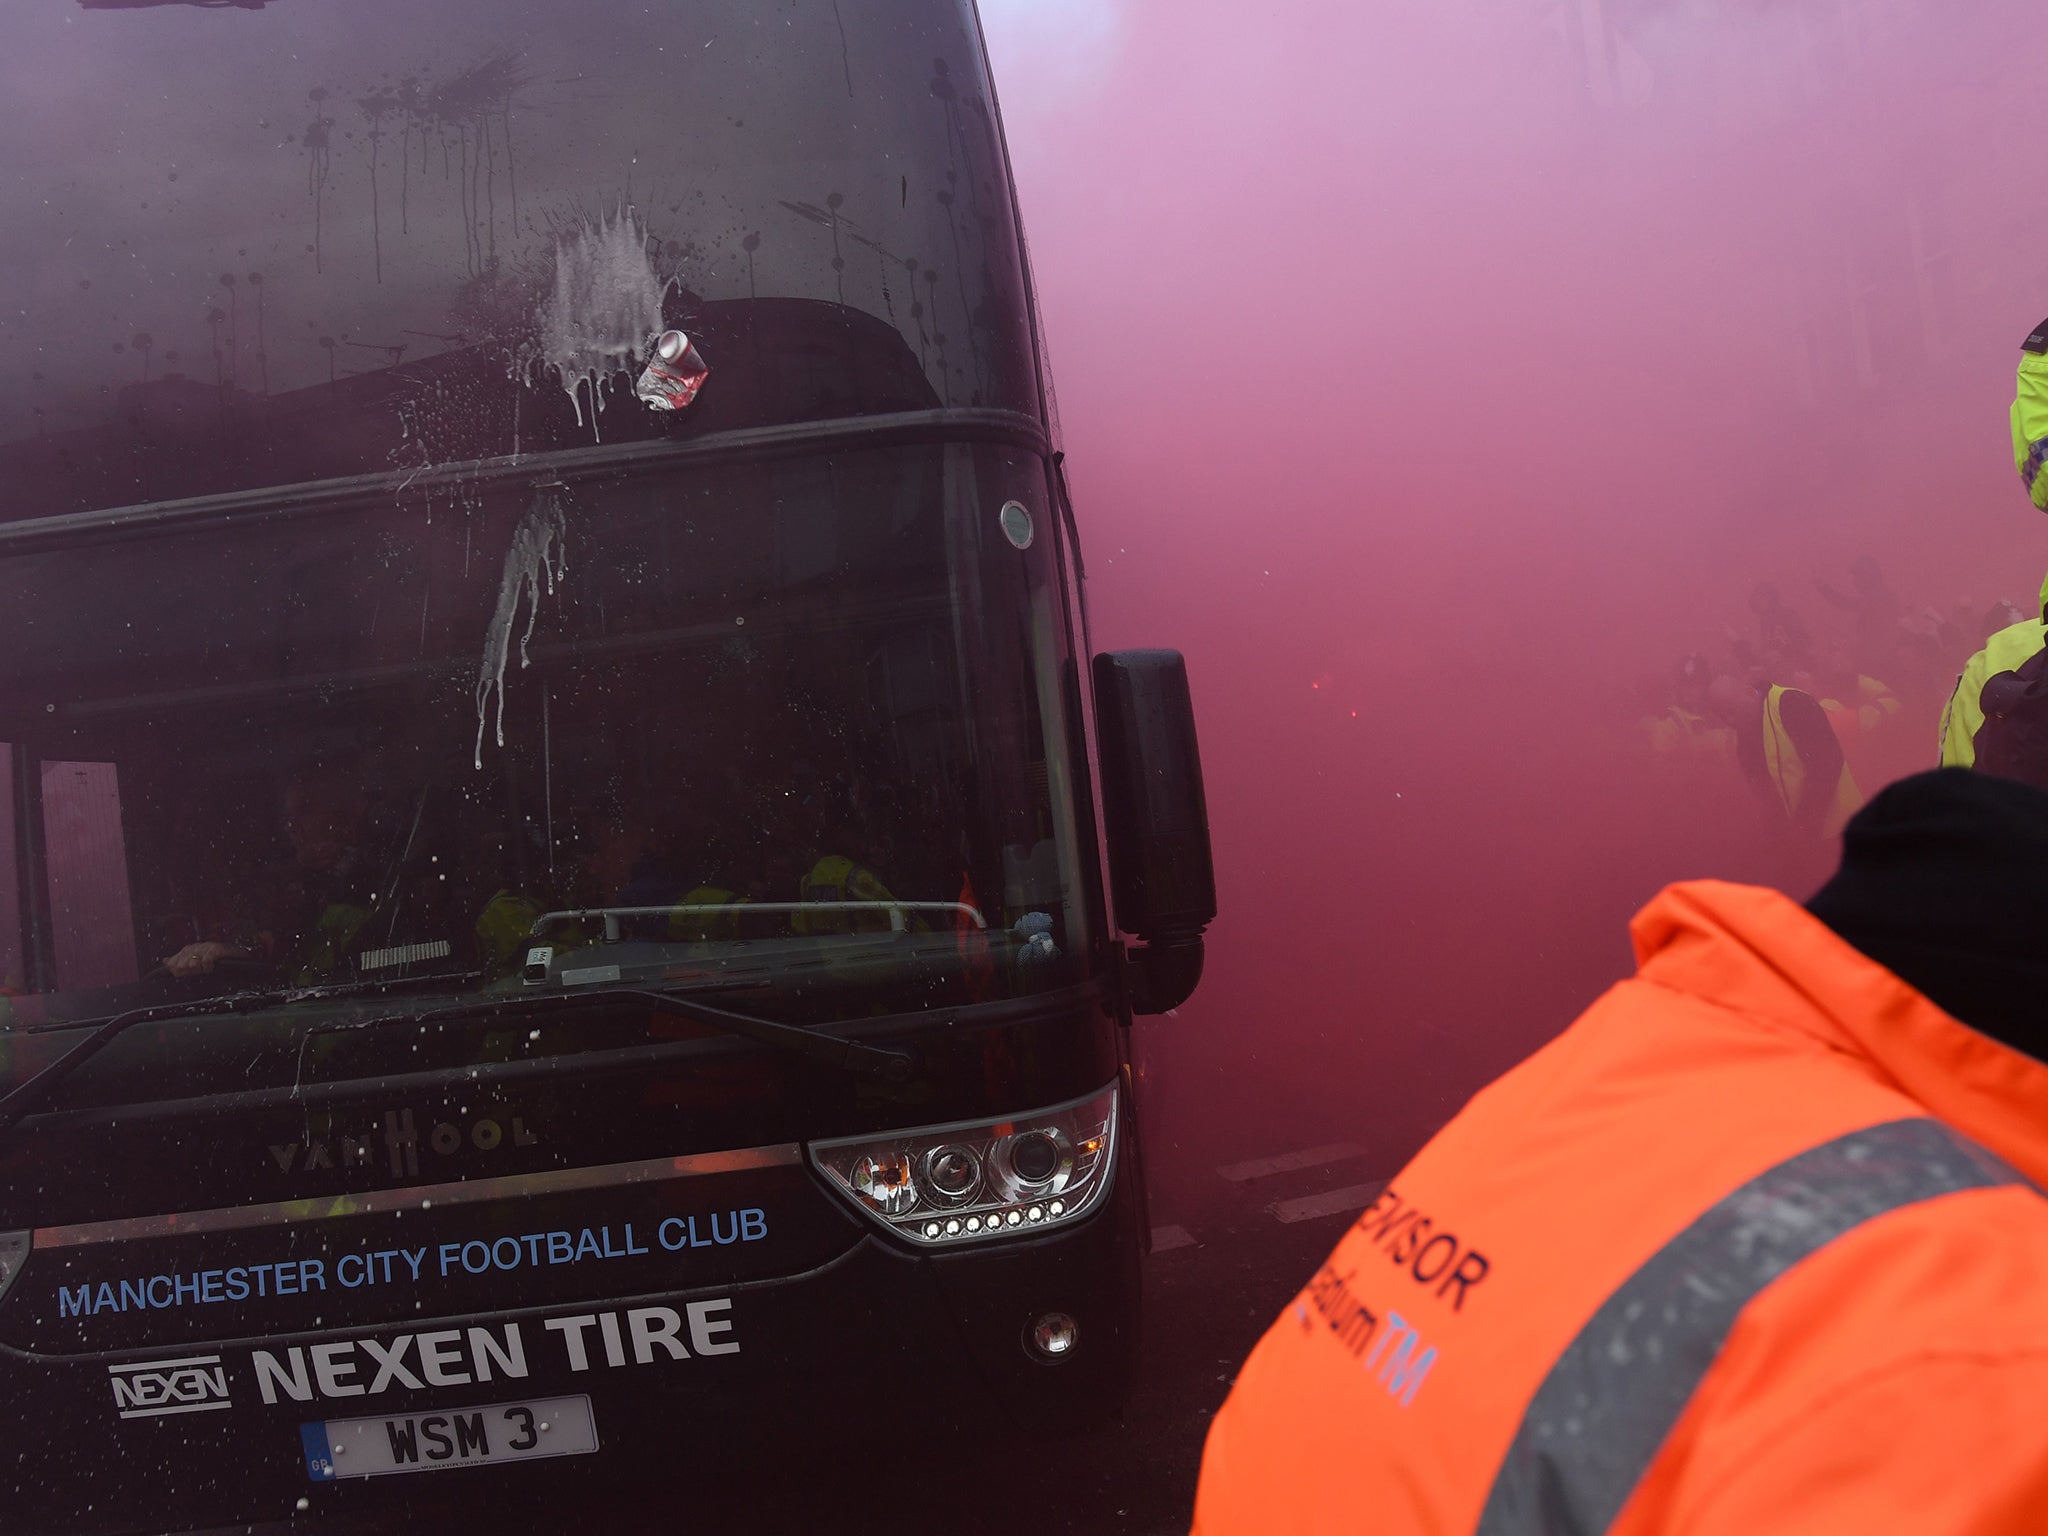 Thirteen coach windows were smashed as Liverpool fans threw bottles and cans at the Manchester City bus